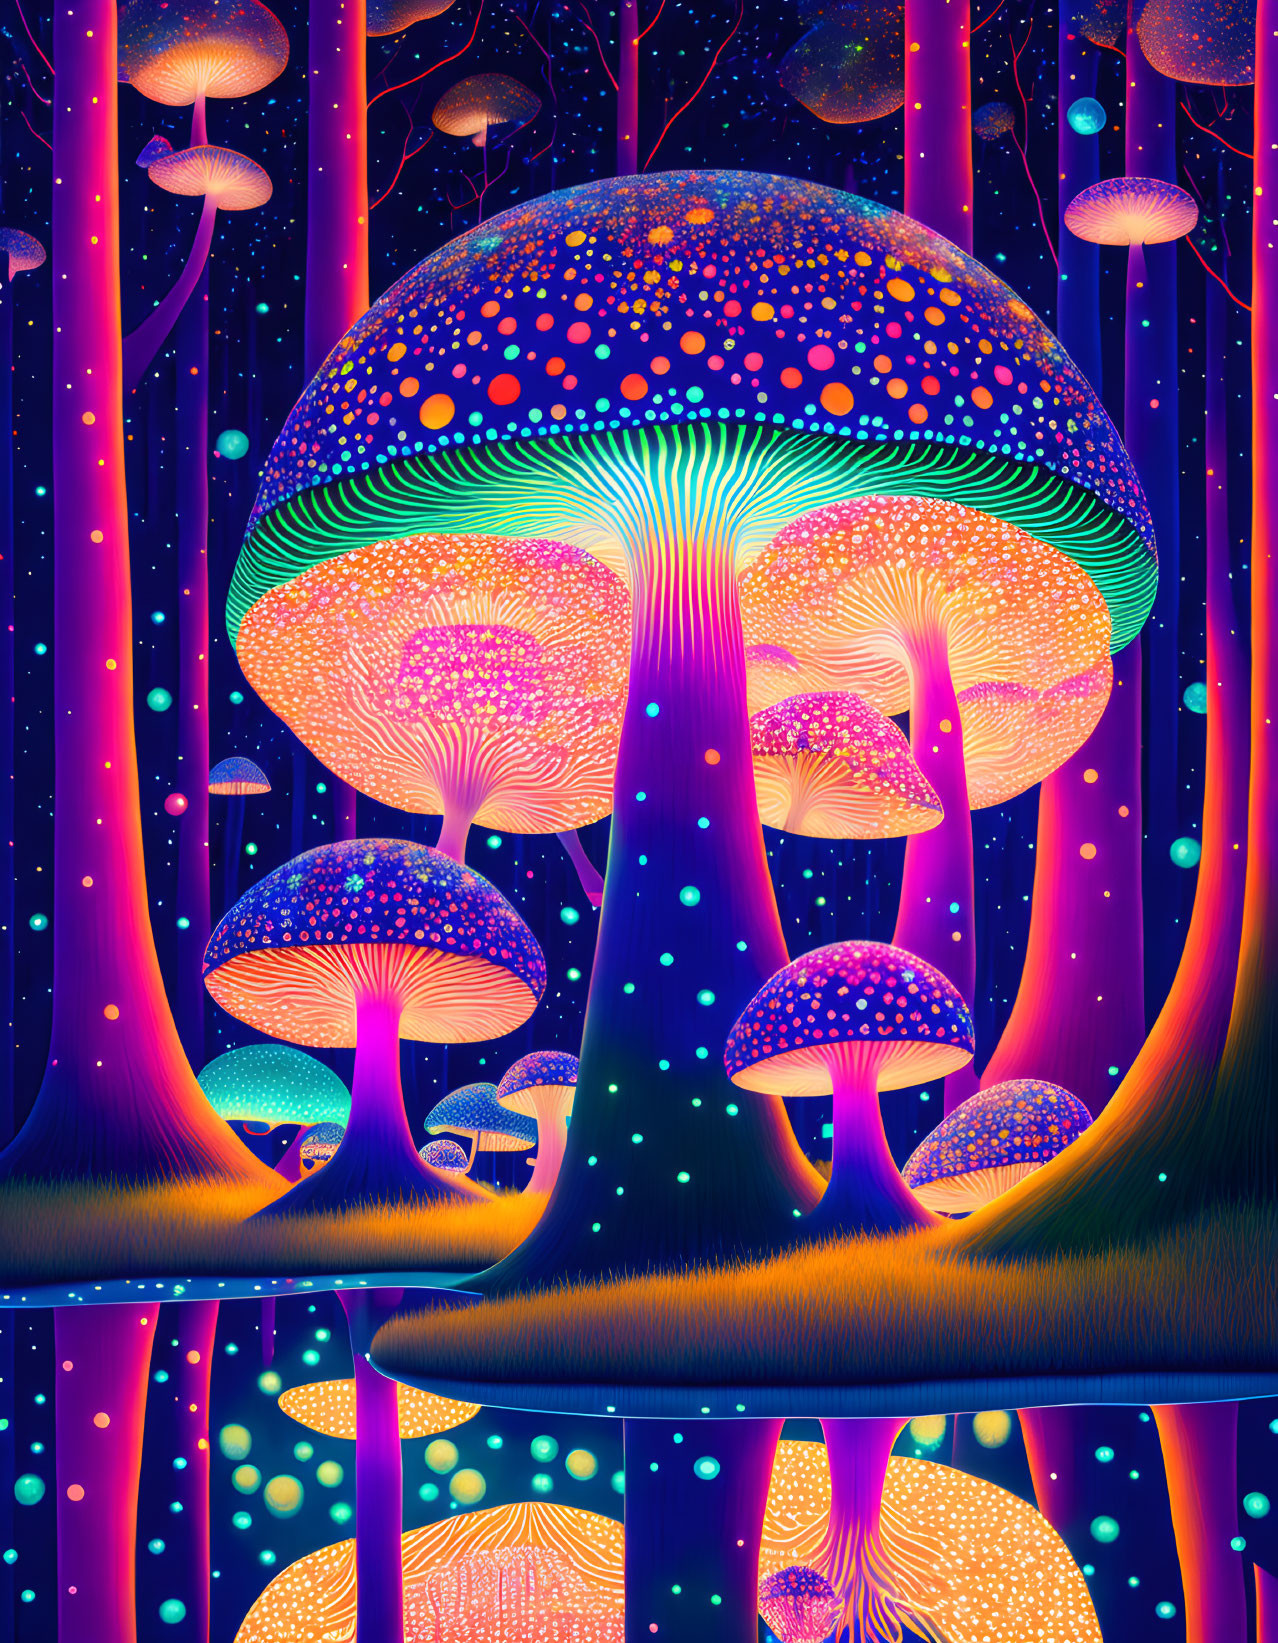 A forest of fantasy fungi